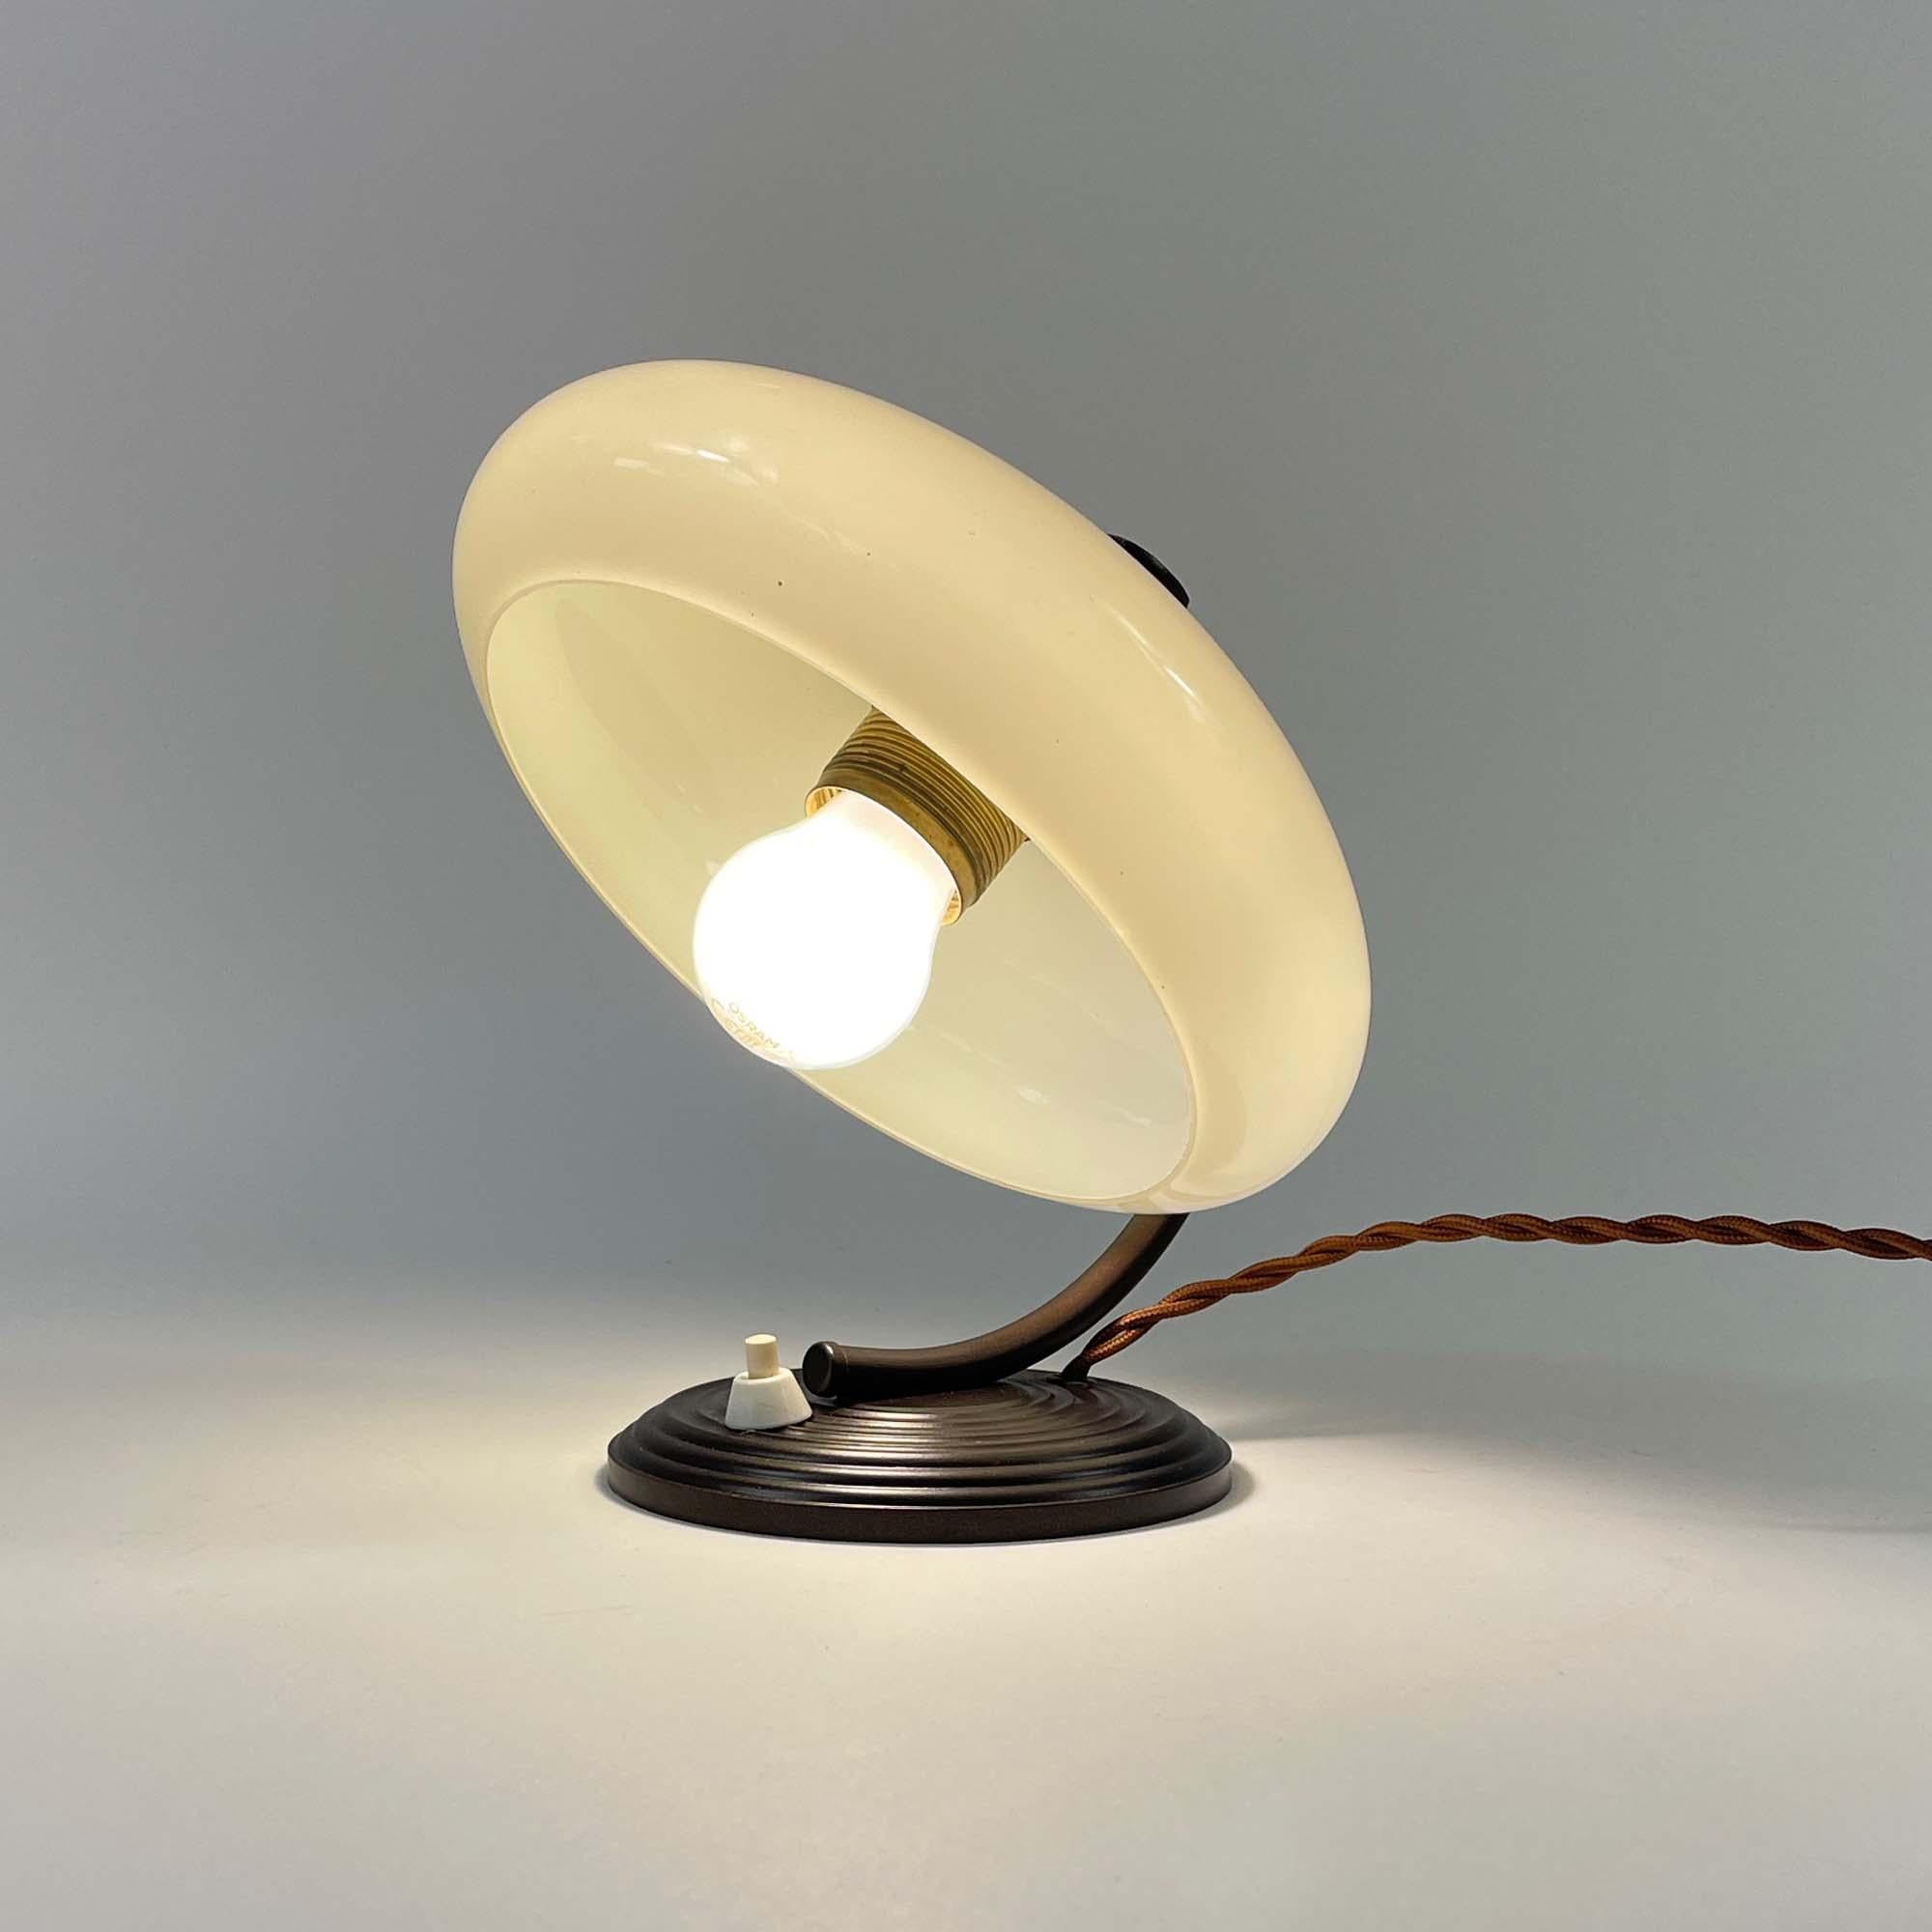 Art Deco Opaline Glass & Bronzed Table Lamp, Germany 1930s For Sale 2